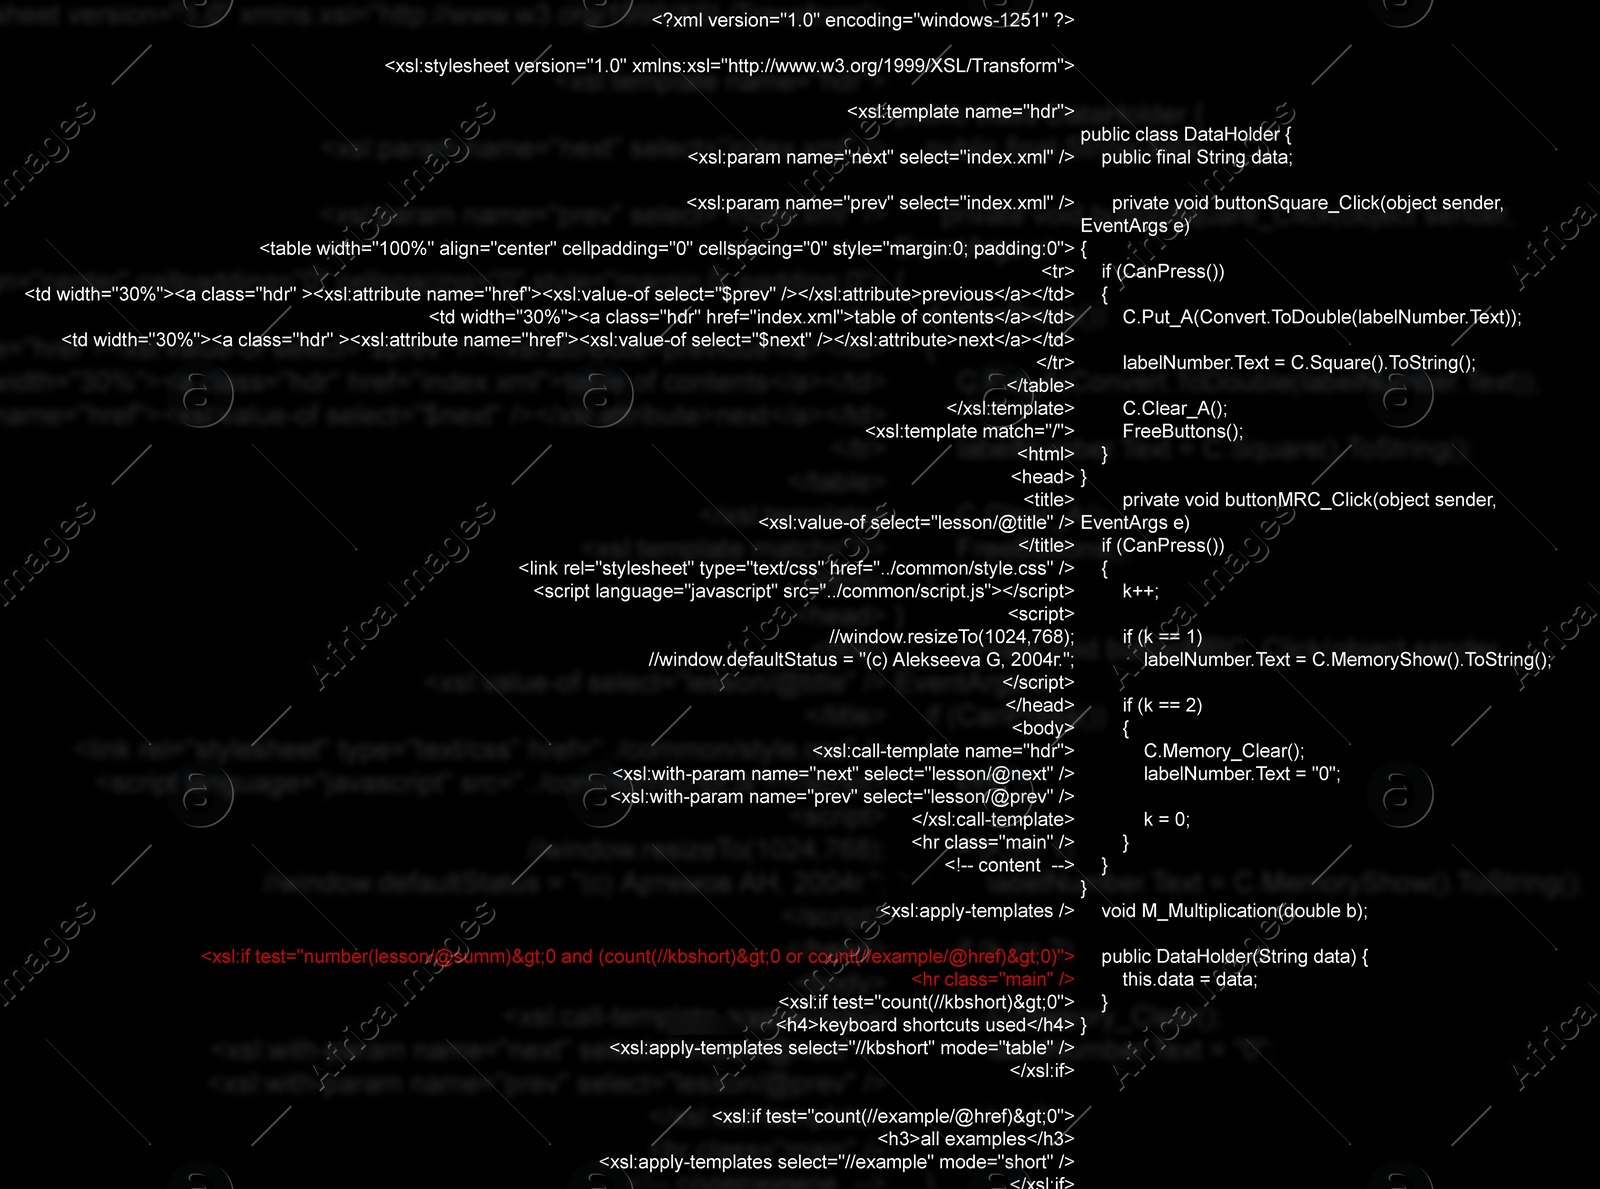 Illustration of Source code written in programming language on black background